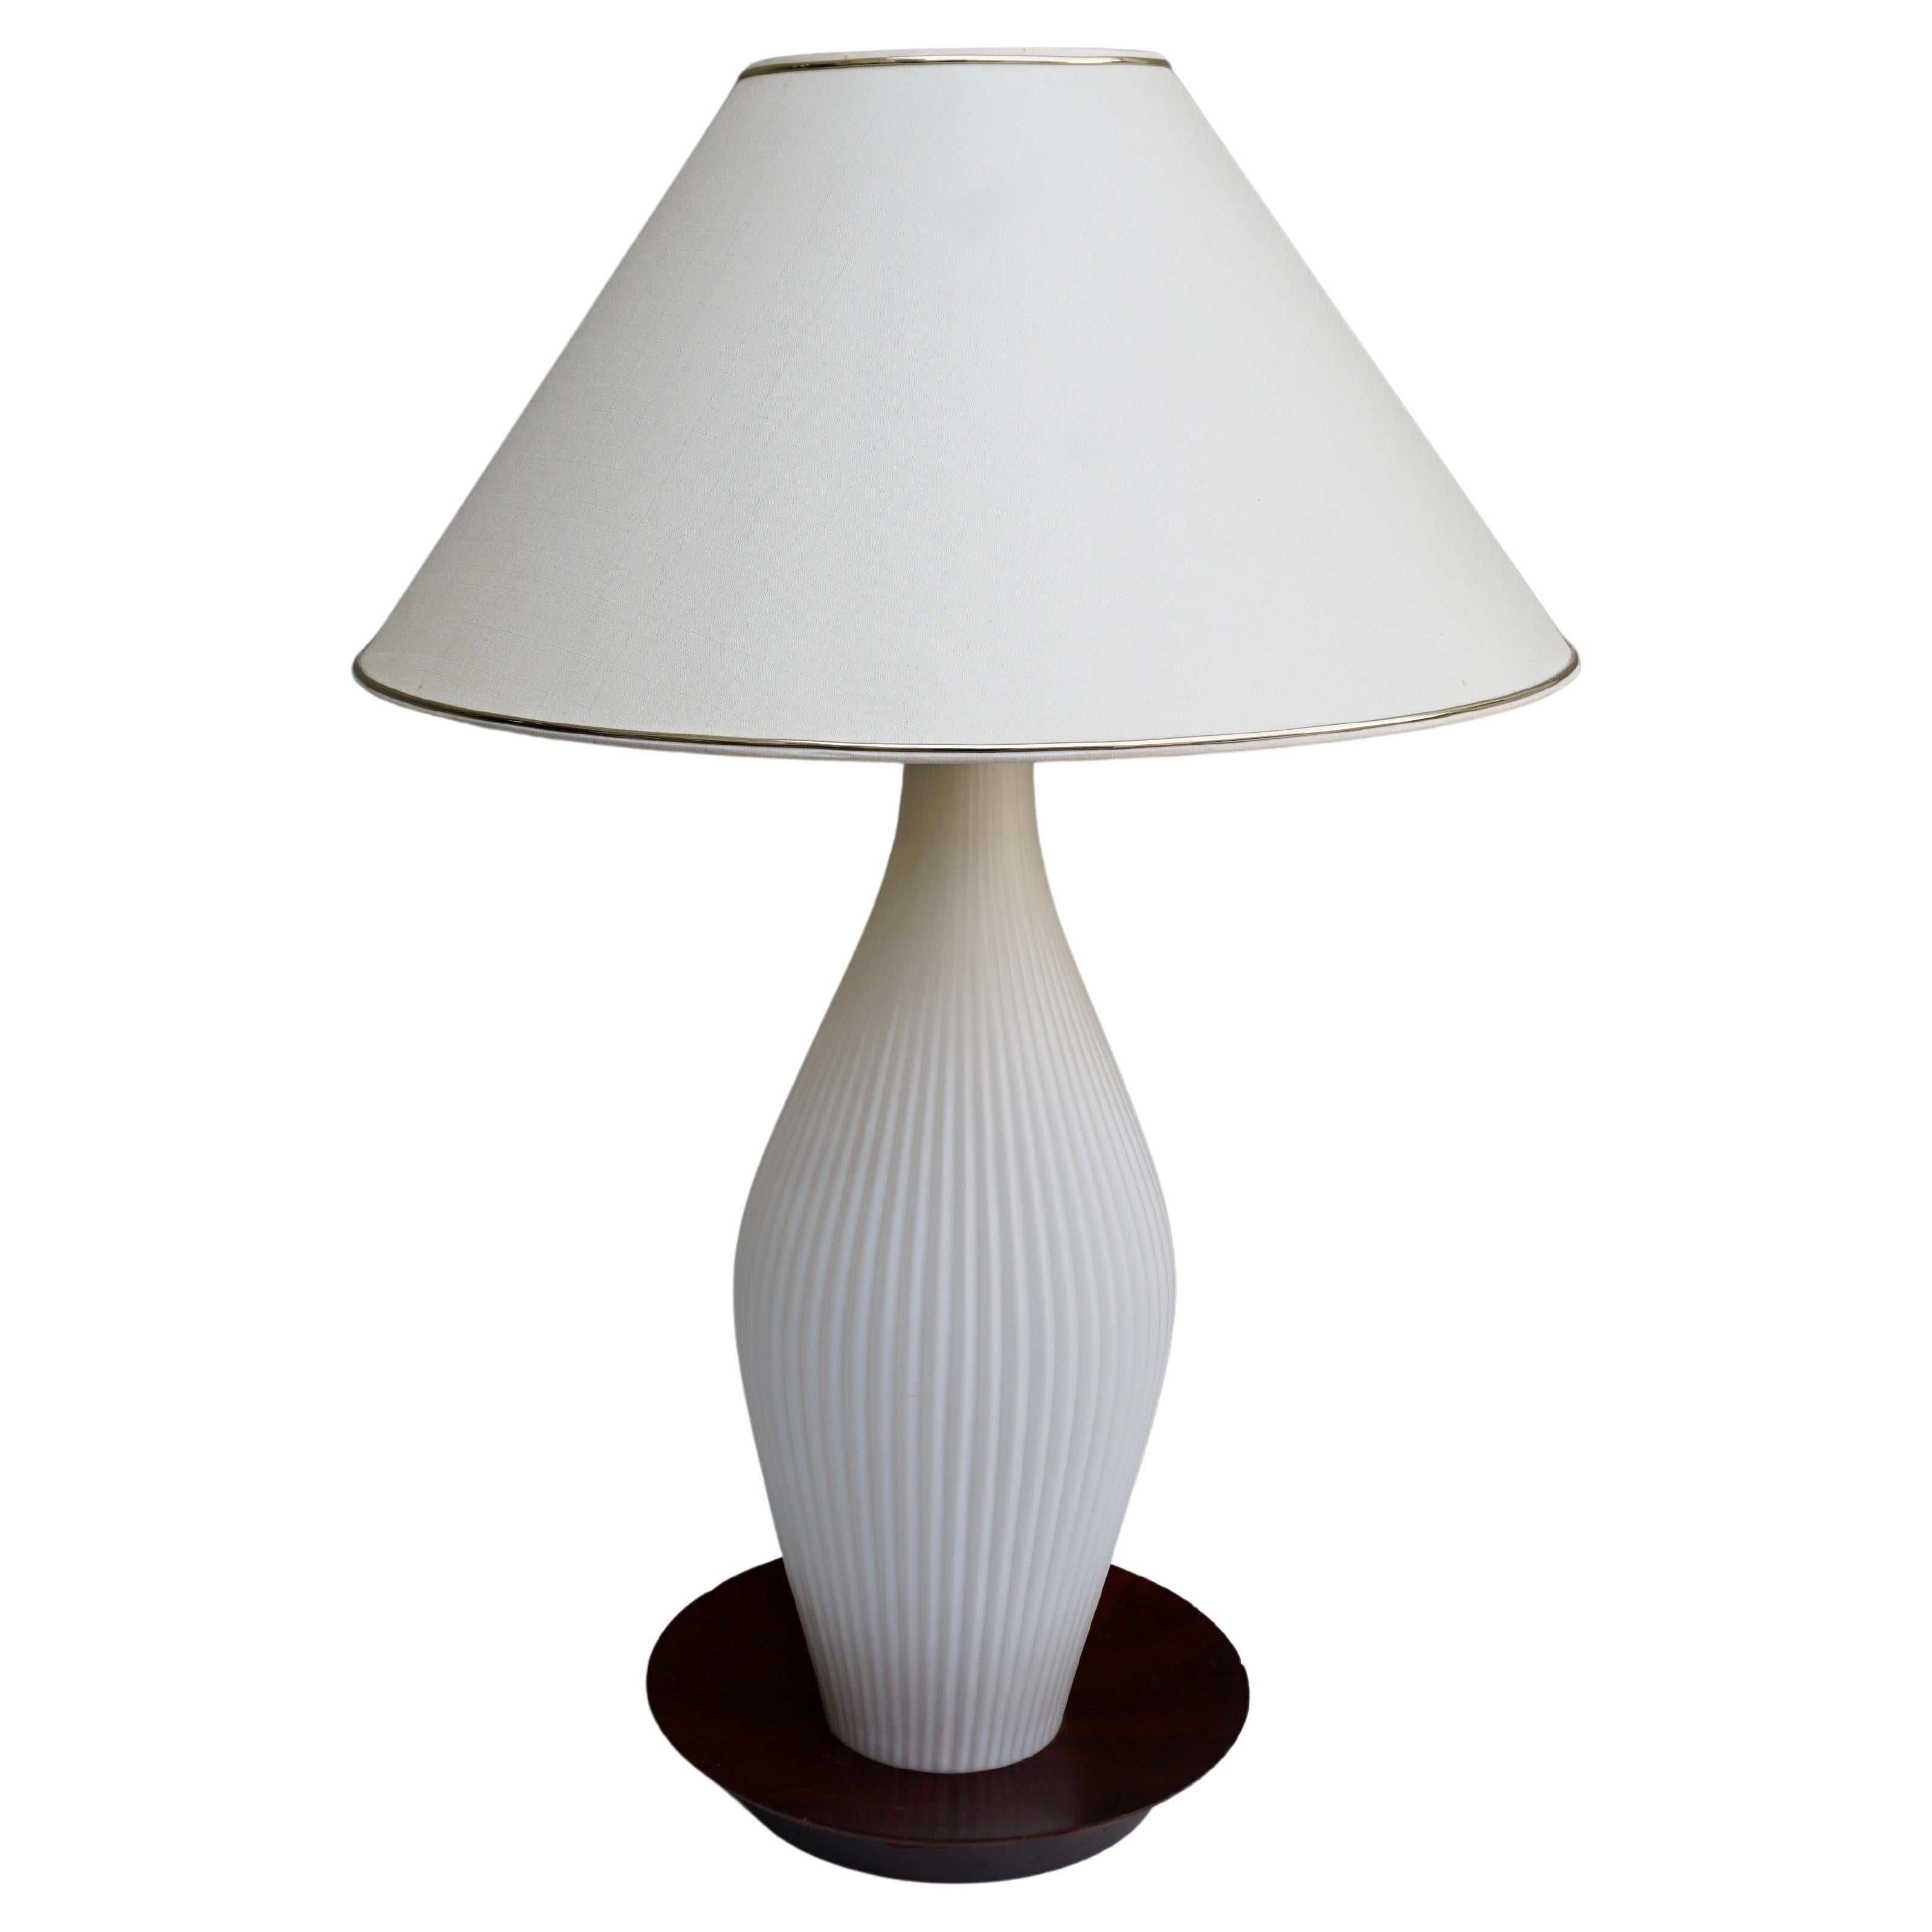 1950s Alfredo Barbini Style ribbed glass table lamp.

The height of the glass including the fitting is 24.8